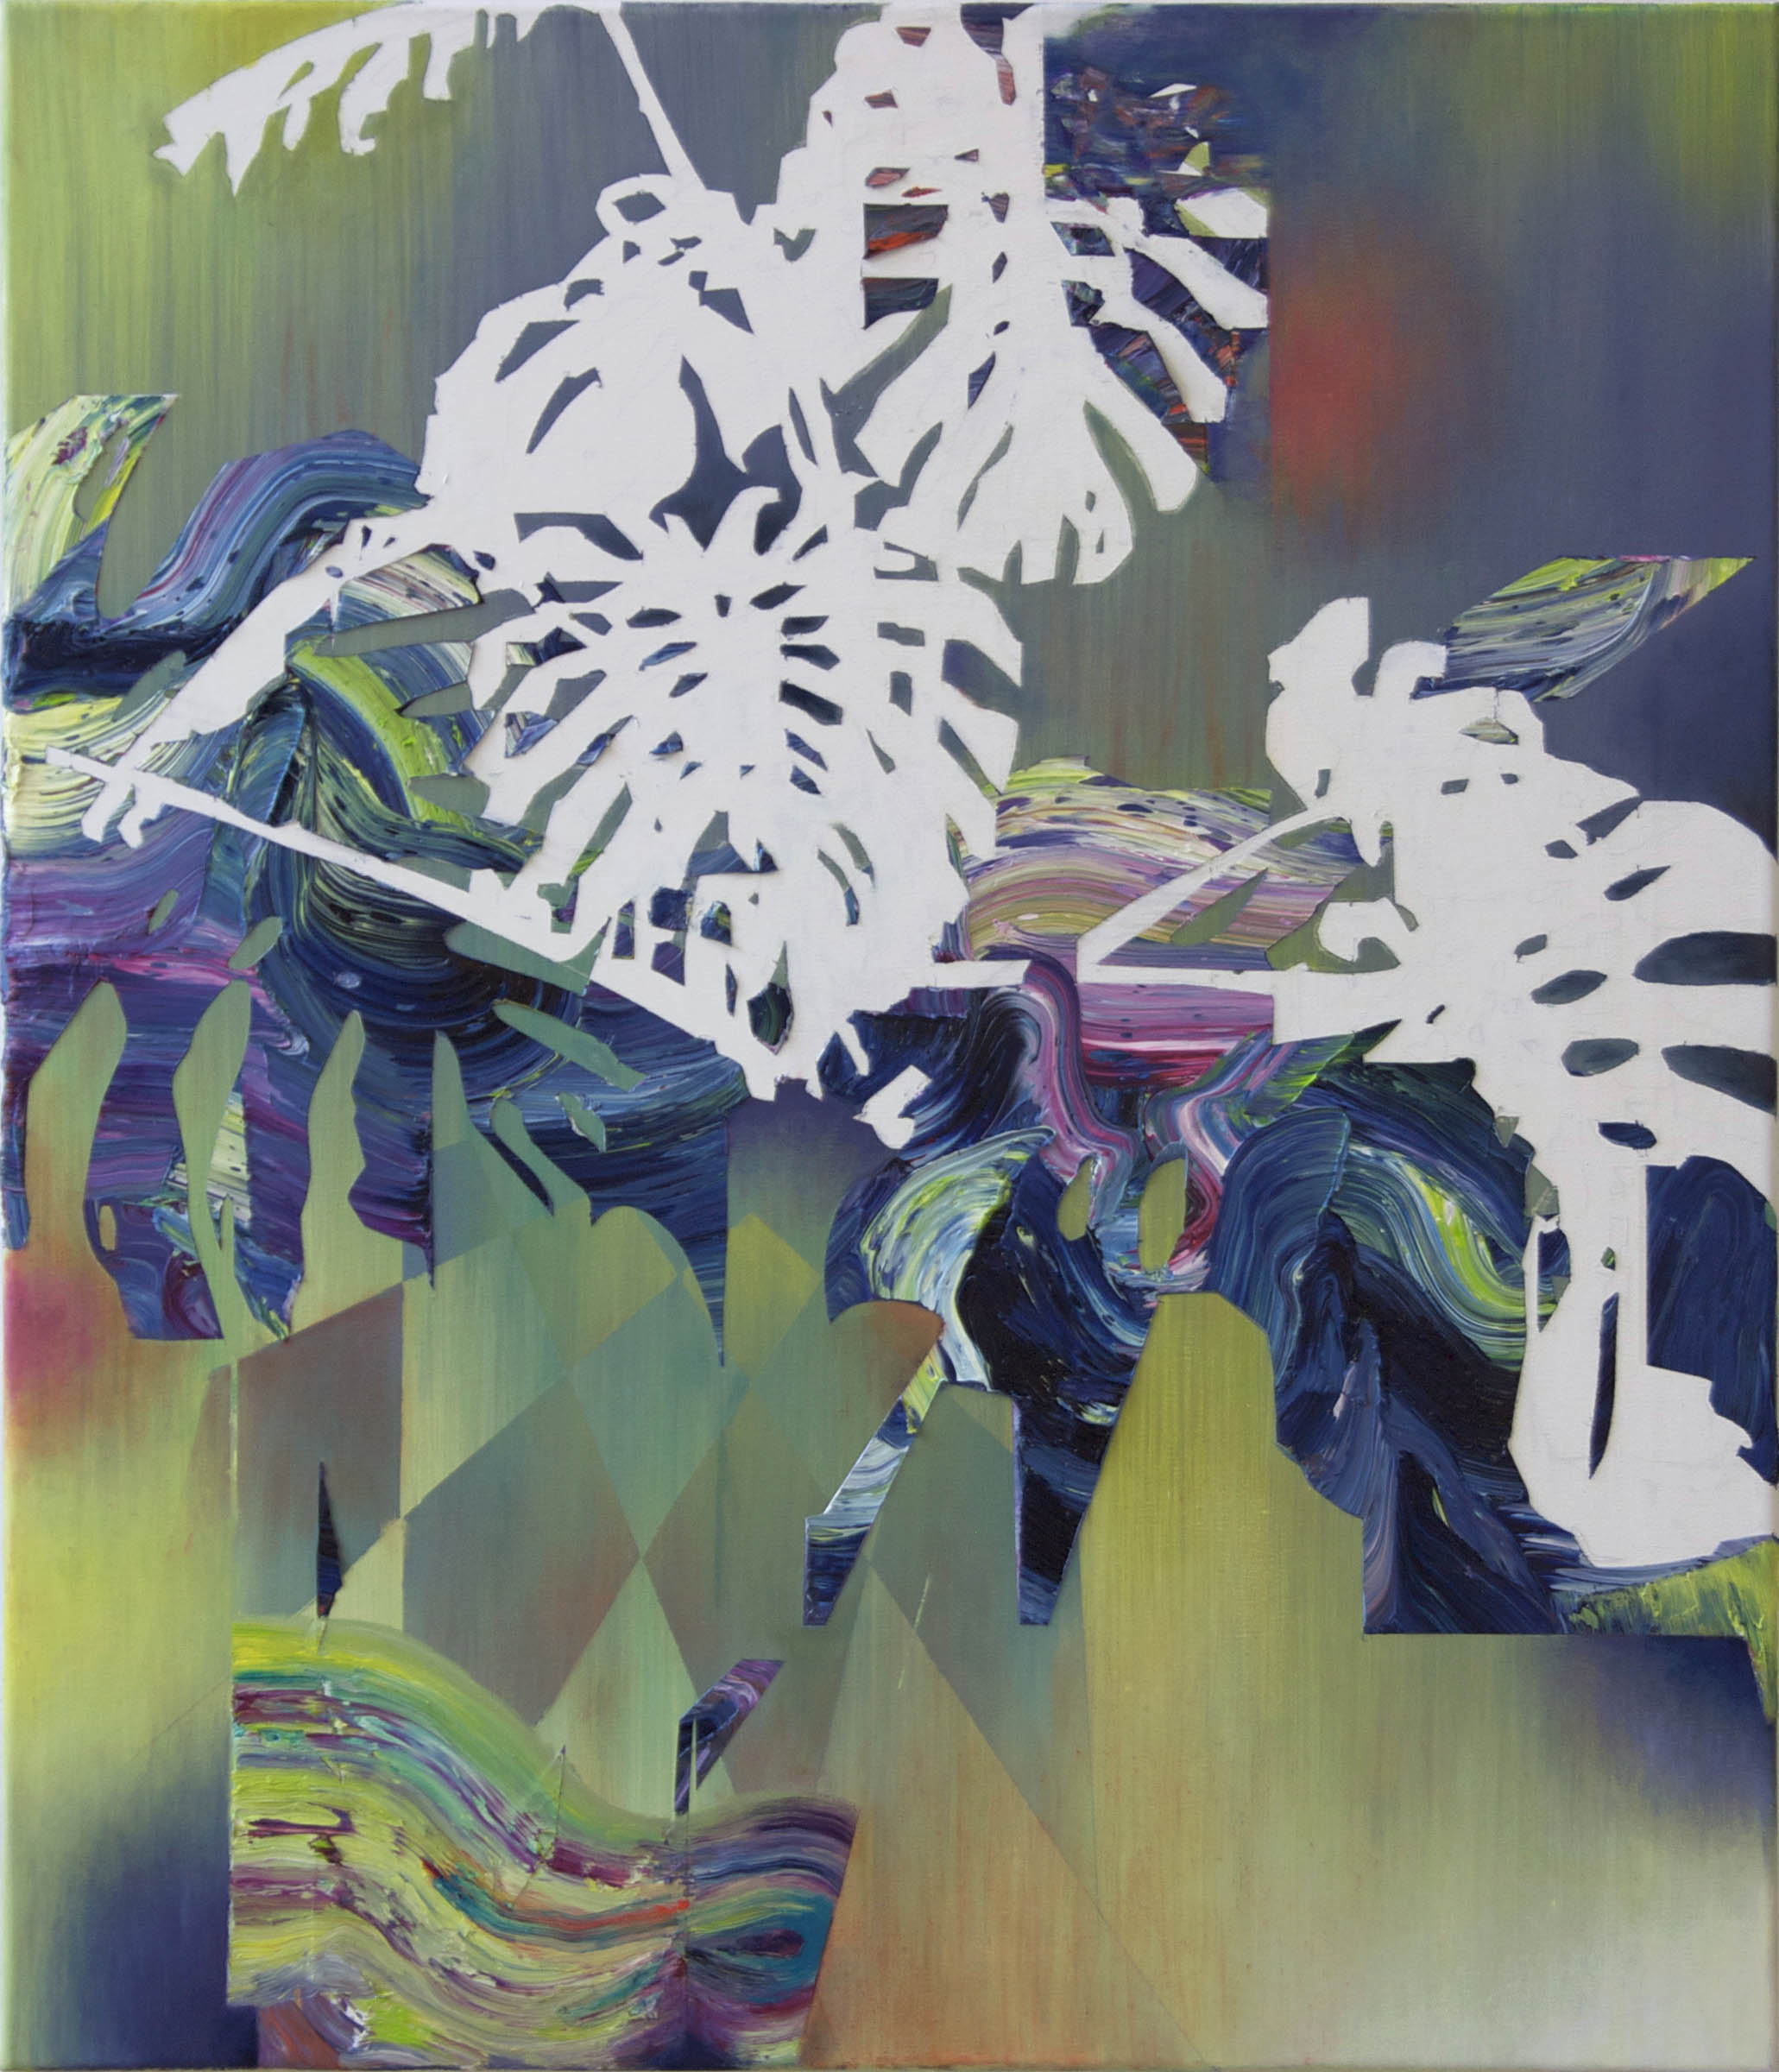   Philodendron  oil on canvas 100 x 80 cm, 2010 